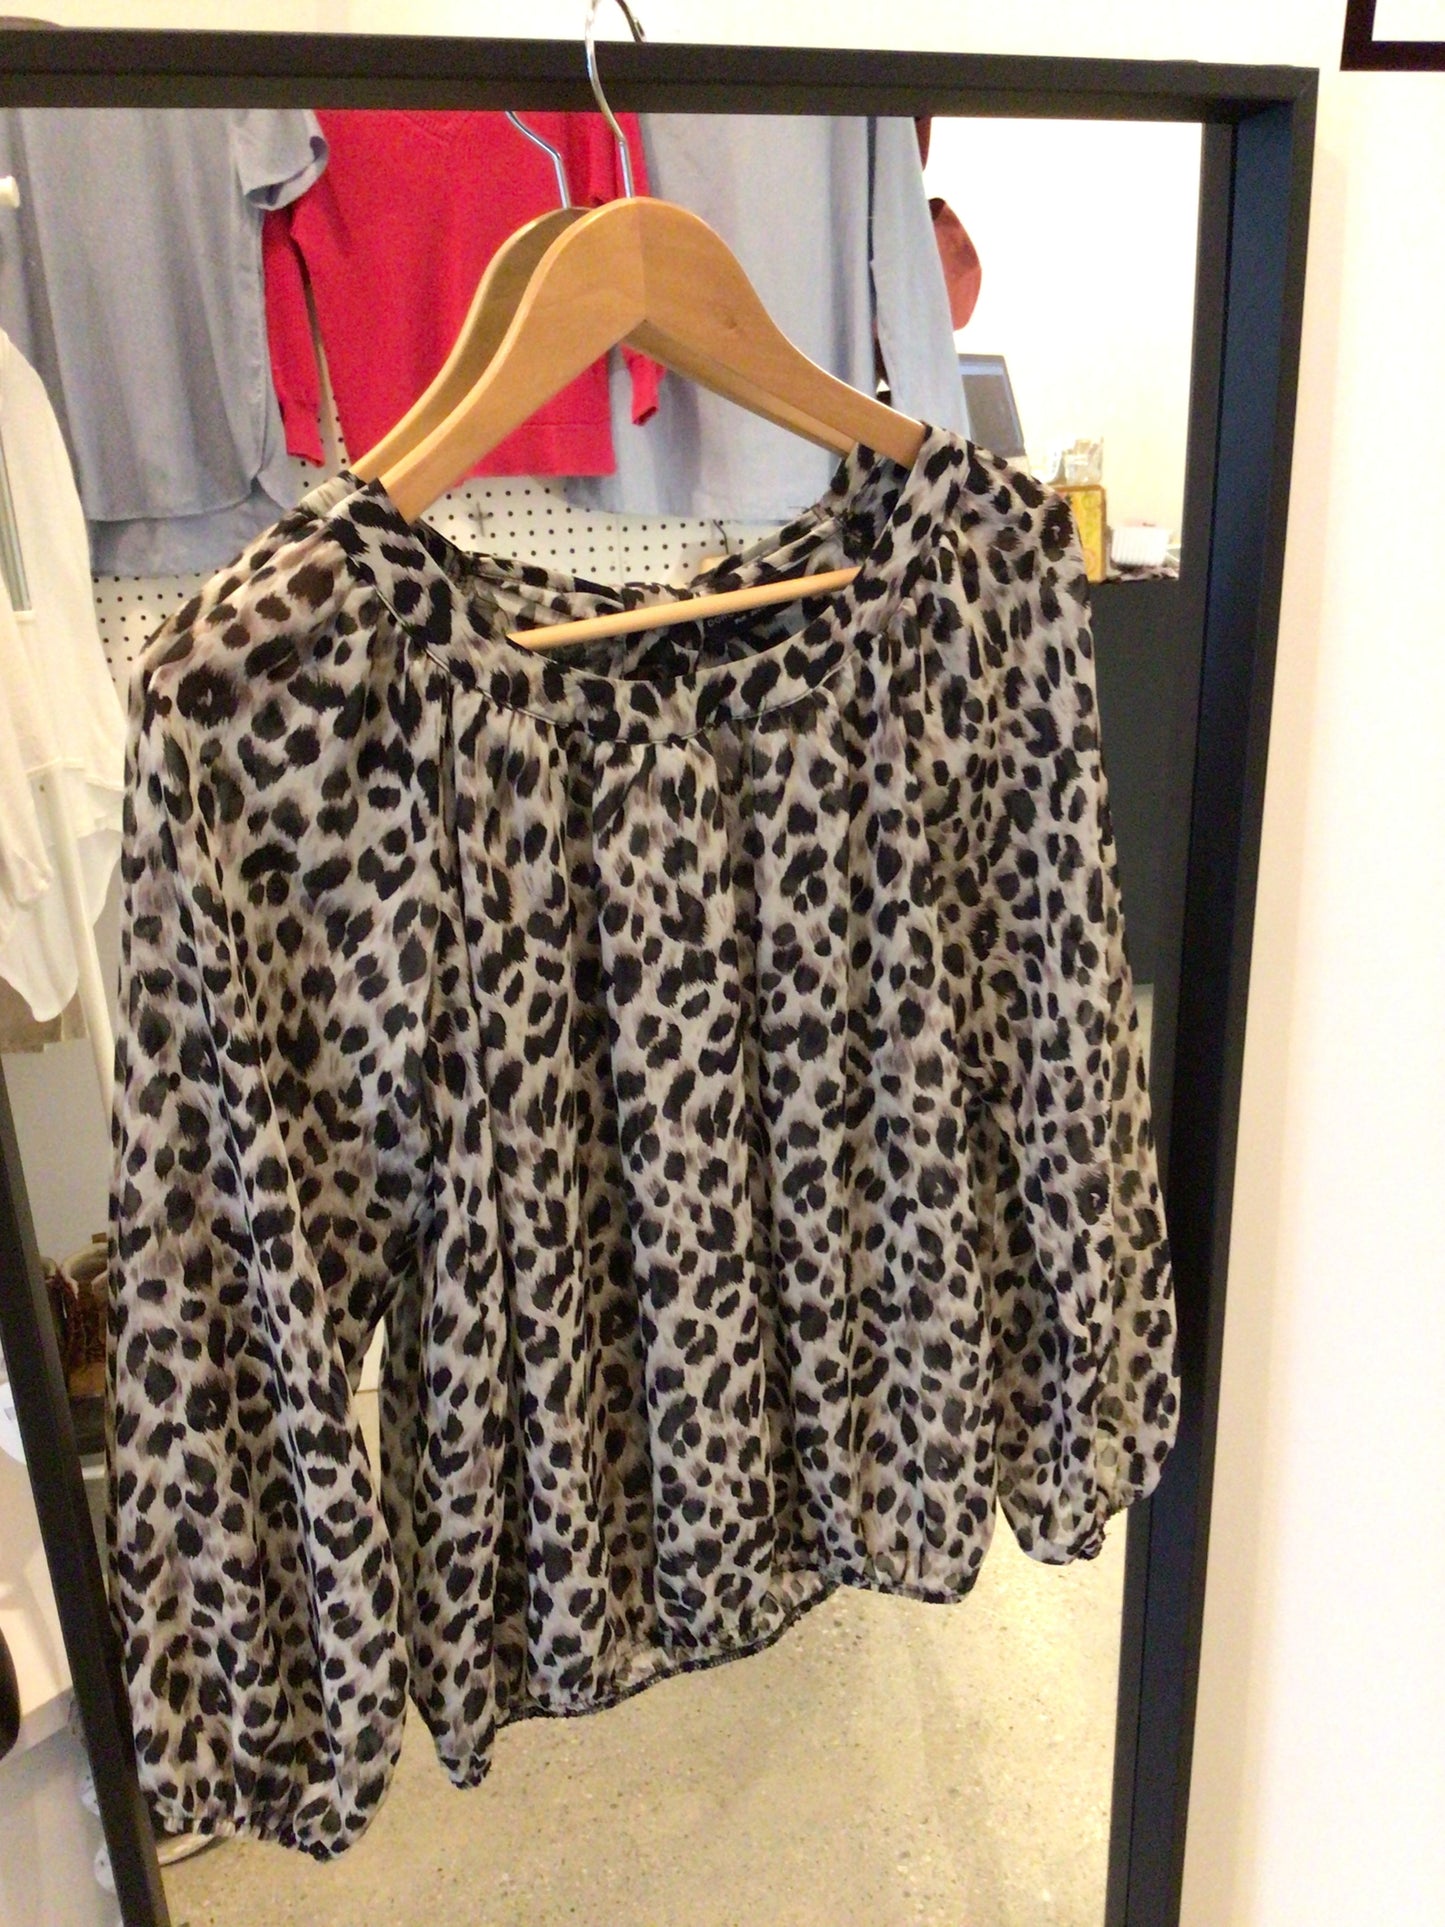 Consignment #1011-15 Dorothy Perkins leopard print blouse